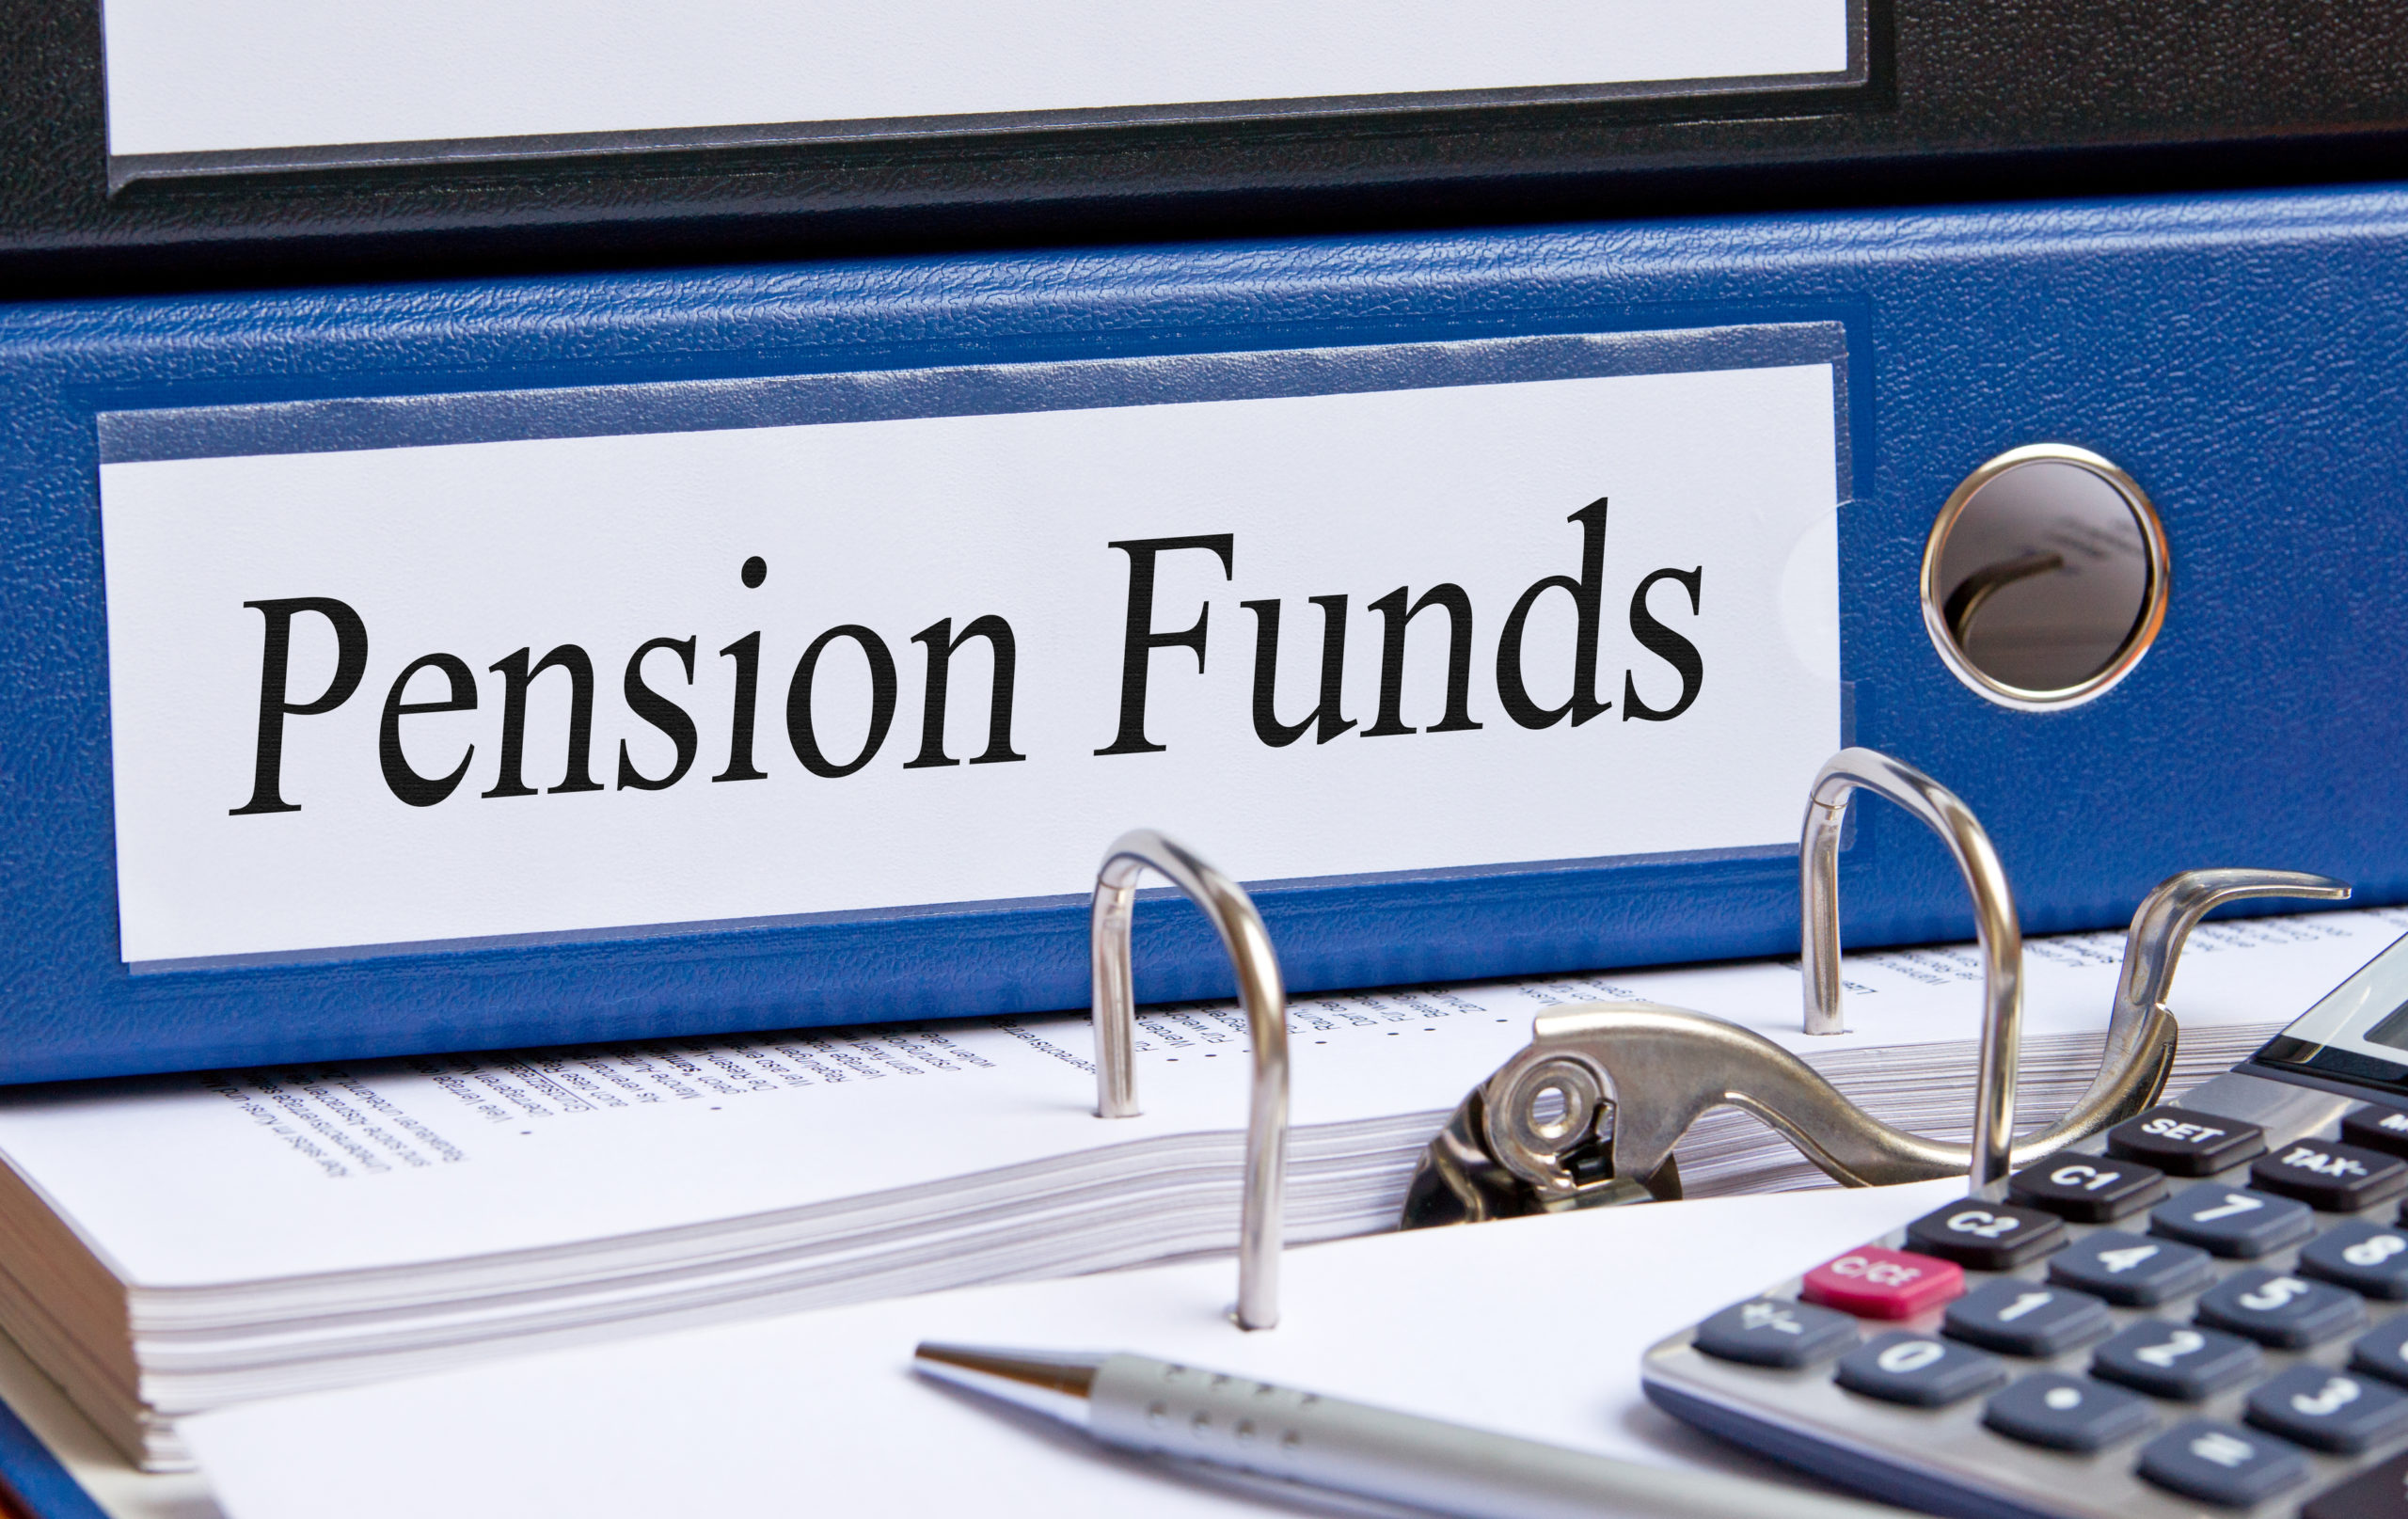 Census Bureau Finds State and Local Pension Contributions Come Up Short